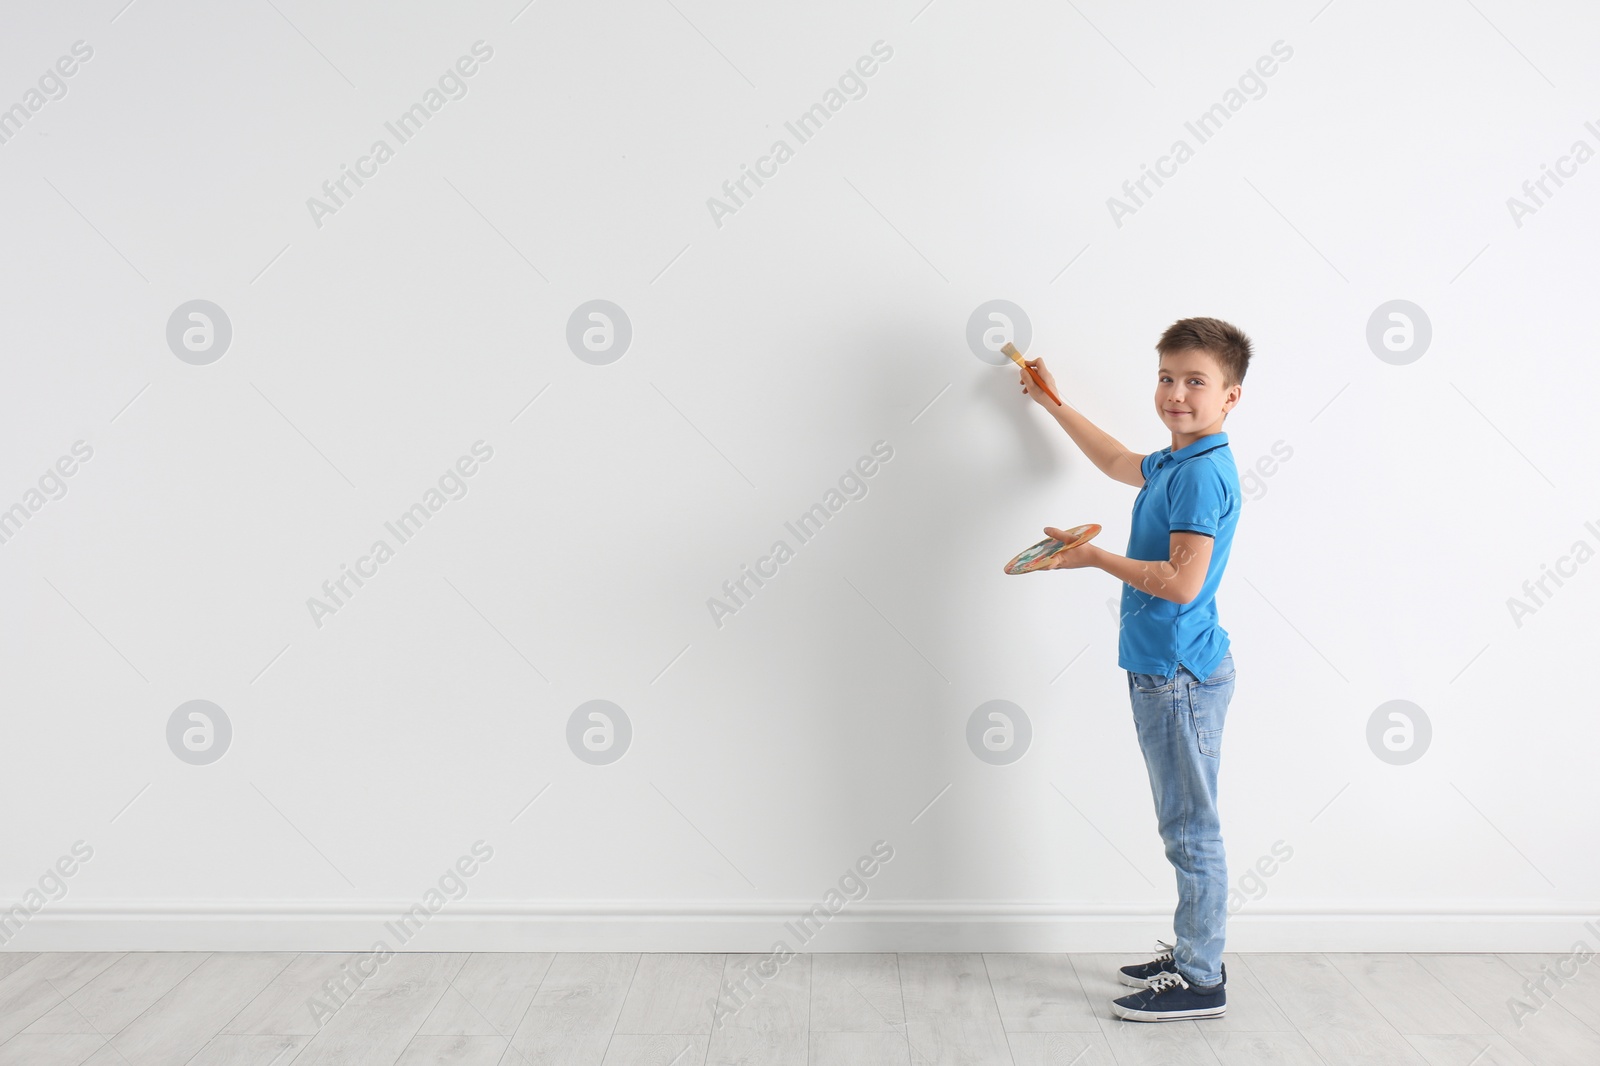 Photo of Little child painting on white wall indoors. Space for text